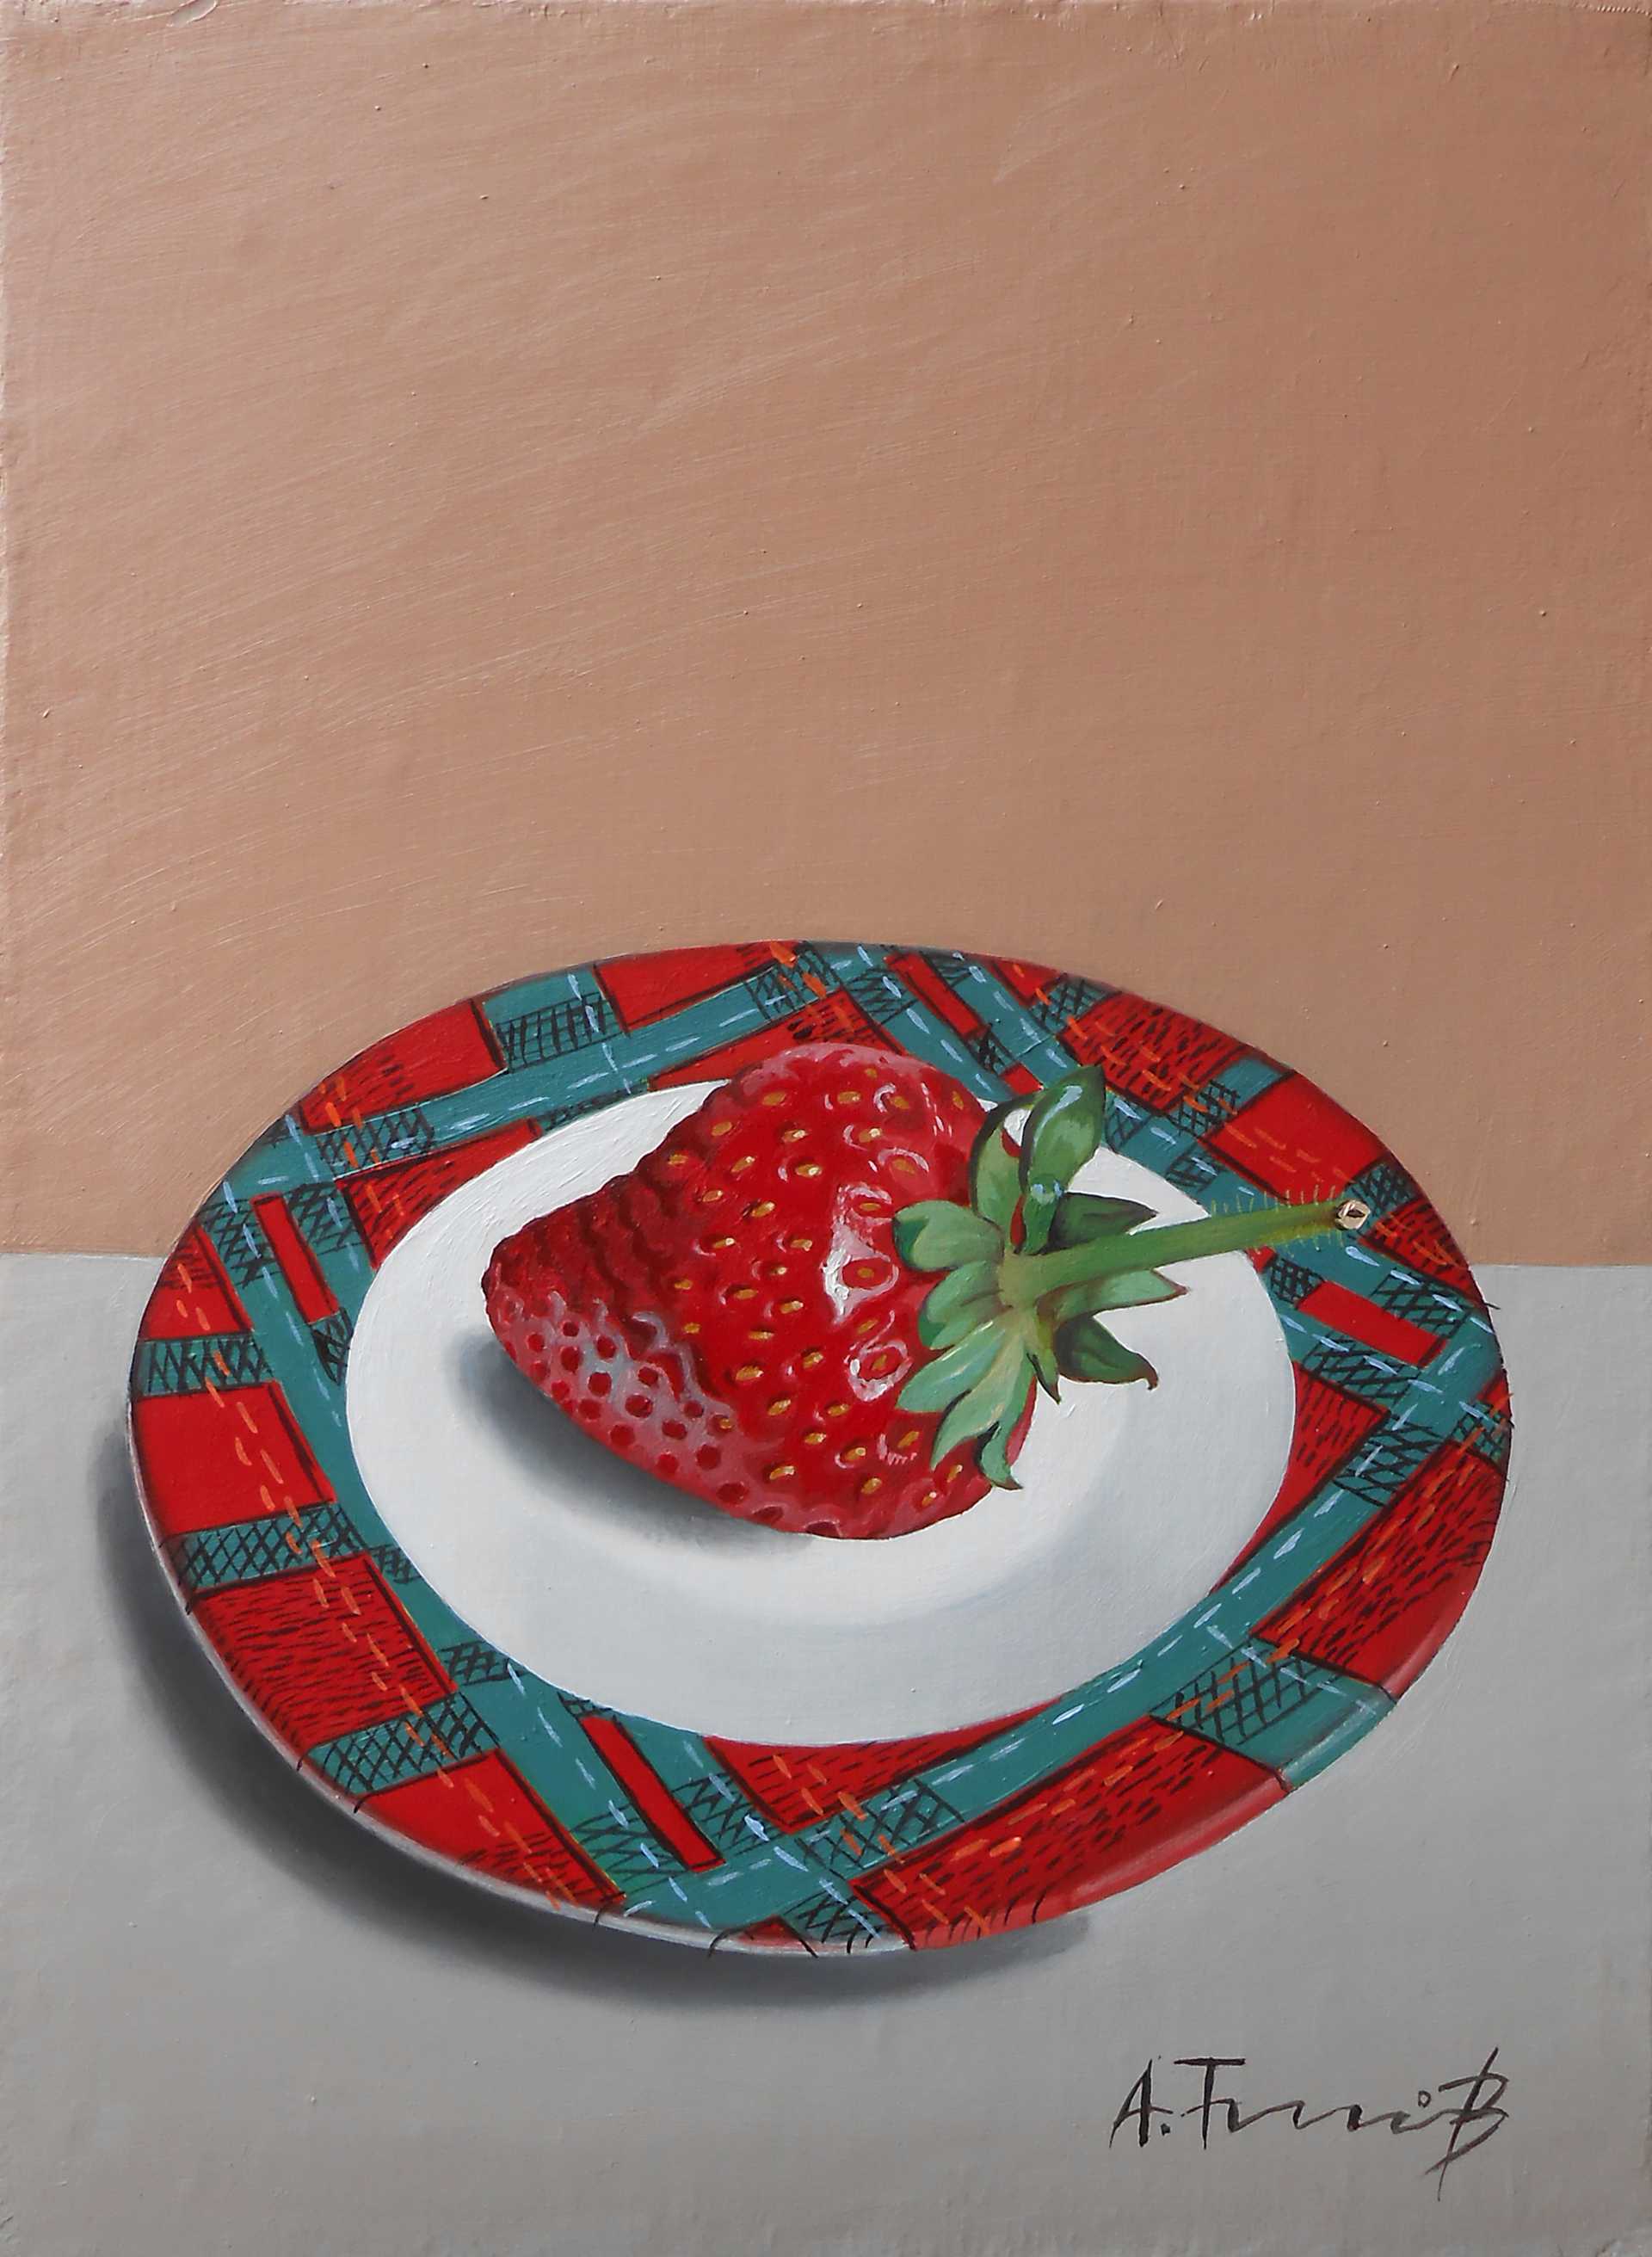 Still Life with Strawberry on Plate